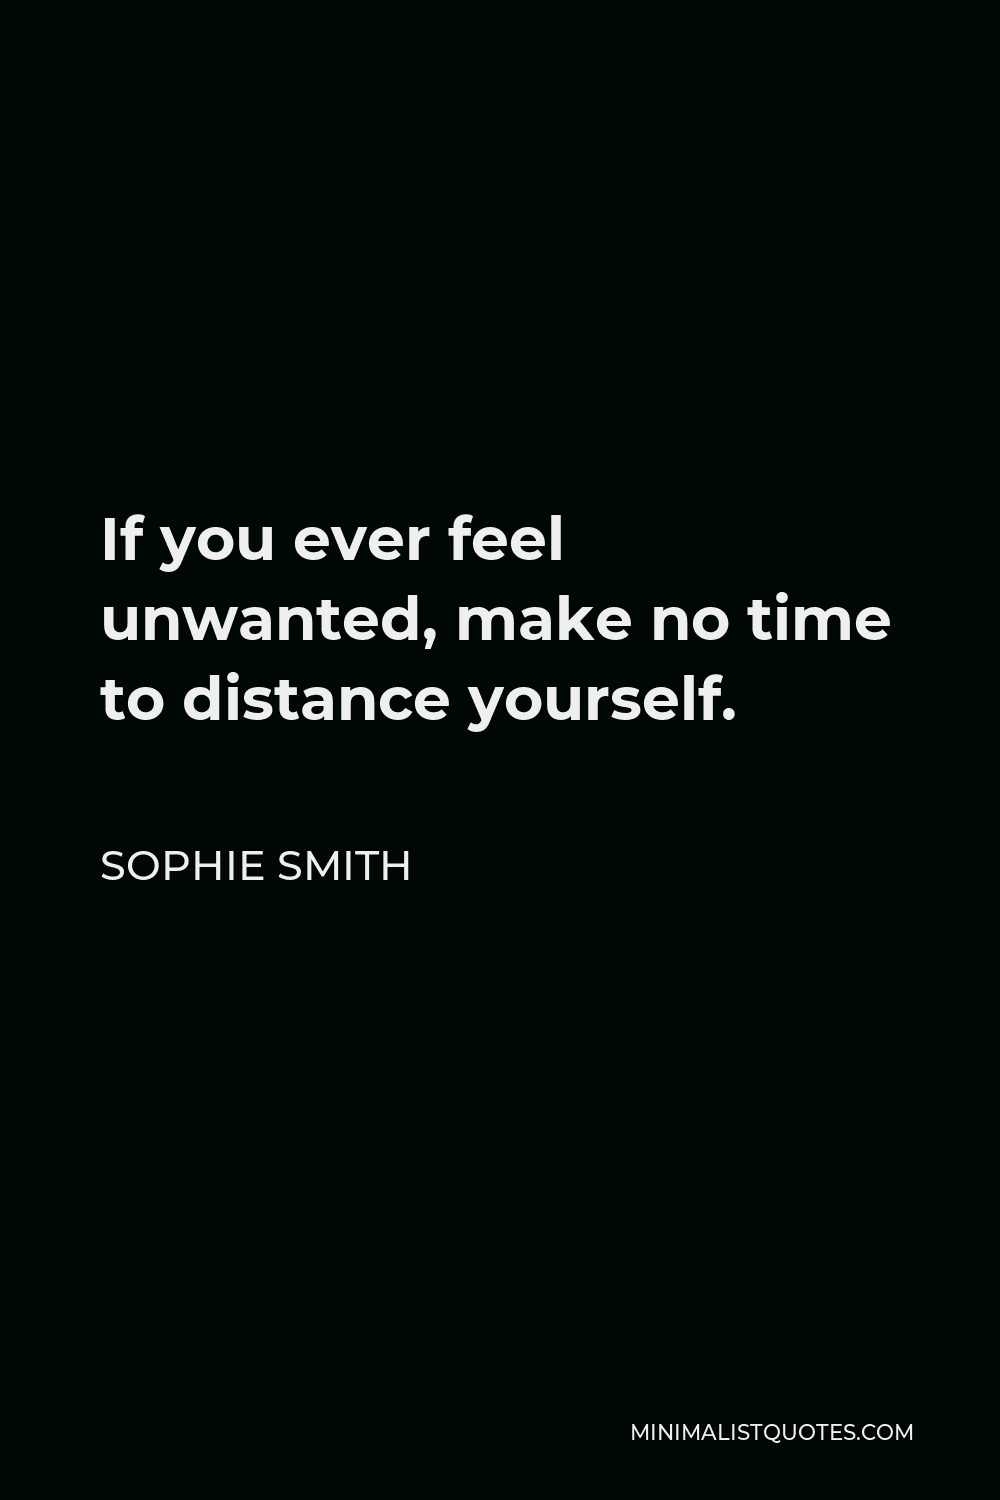 Sophie Smith Quote - If you ever feel unwanted, make no time to distance yourself.